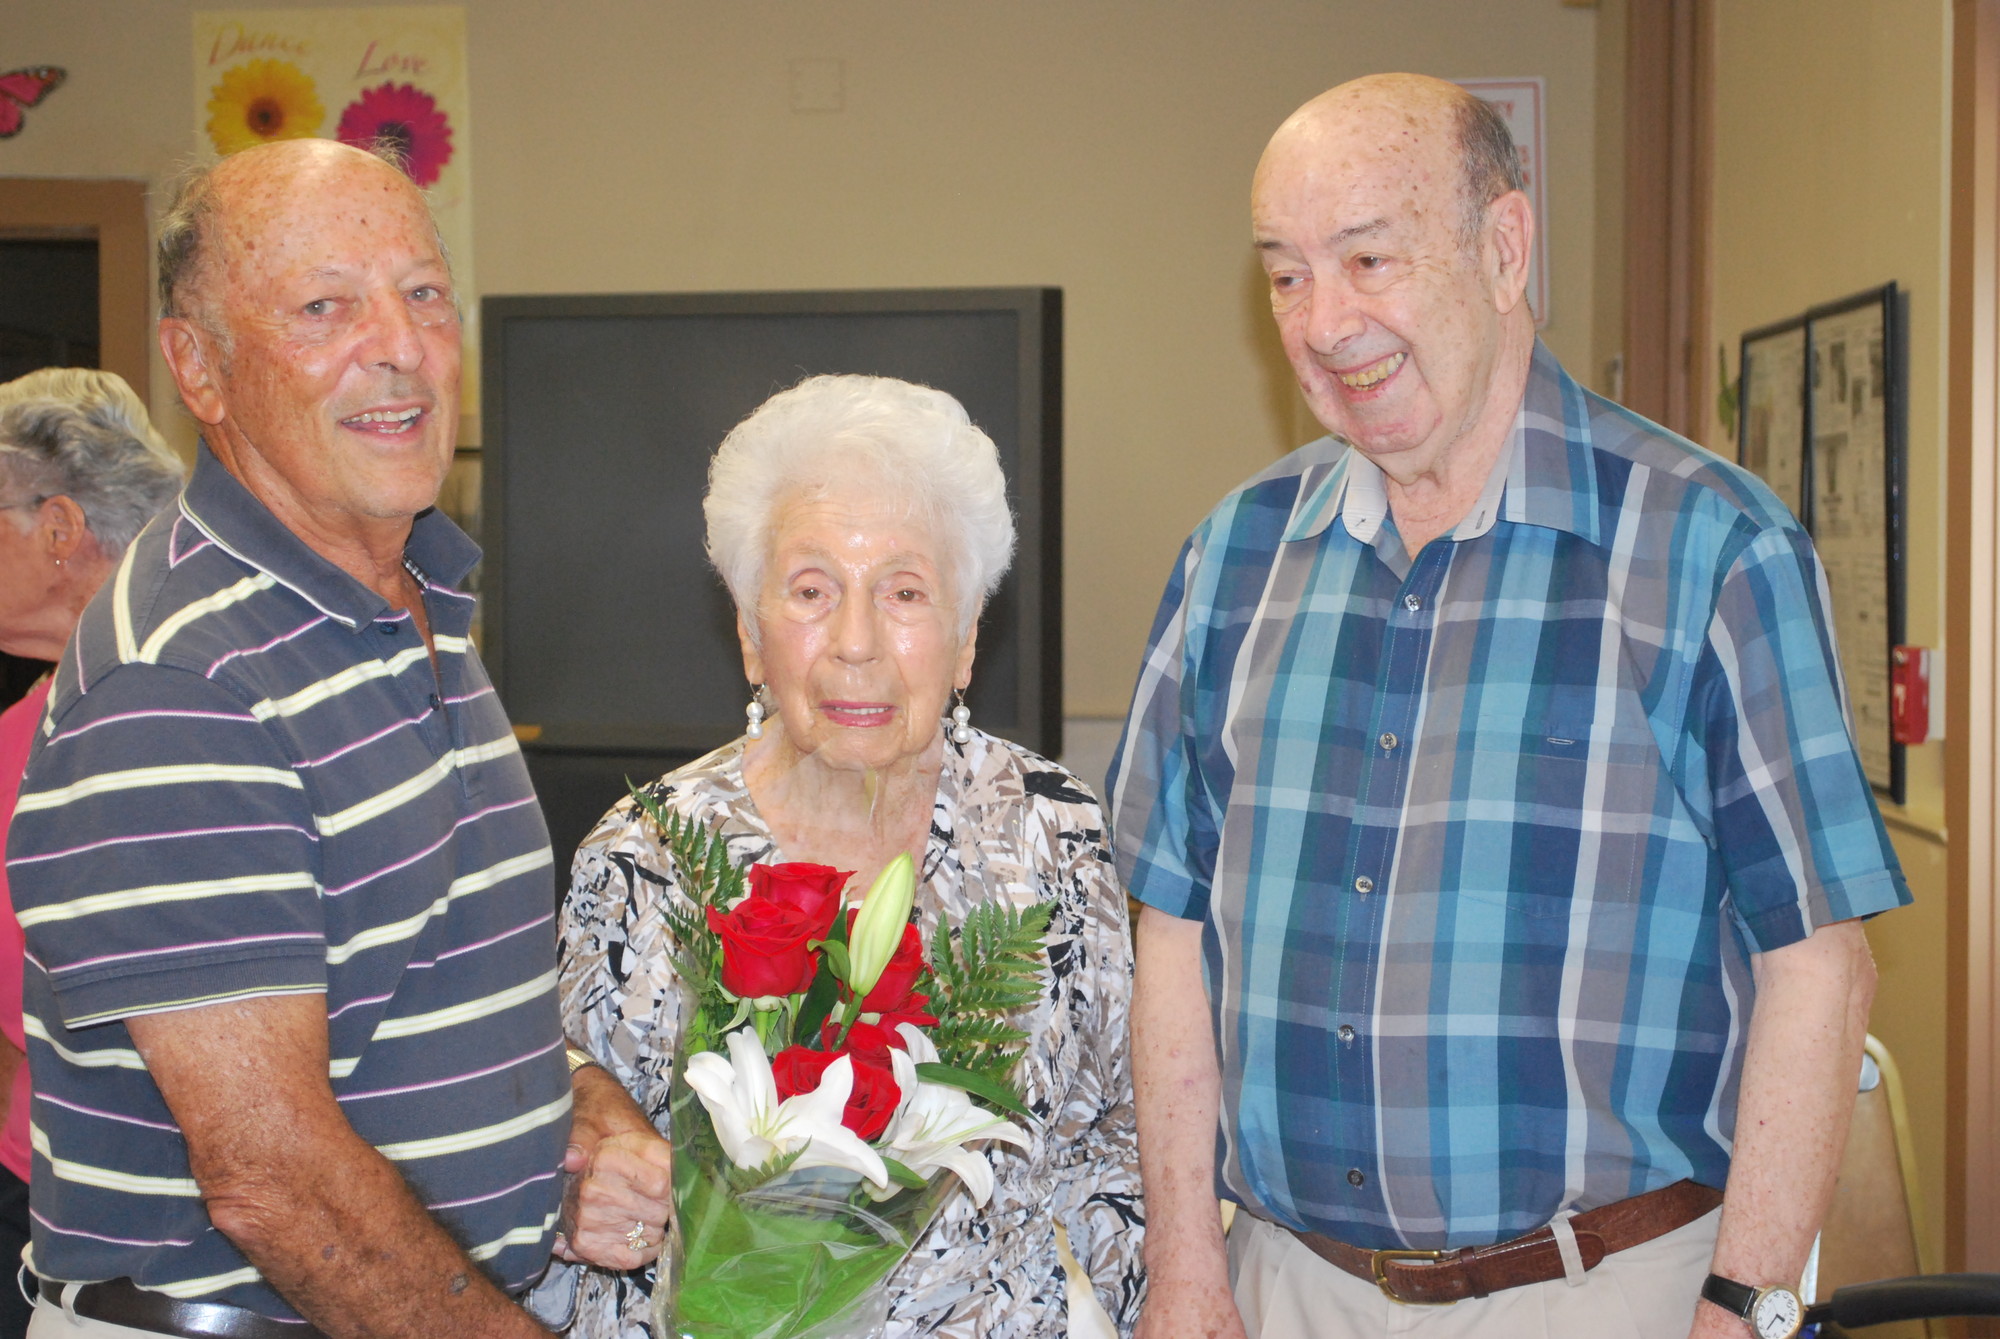 Playing bridge at the Center For Adult Life Enrichment is one way Henrietta Dobin remains busy. With fellow card players Victor Molinsky, left, and Irwin Sklar.